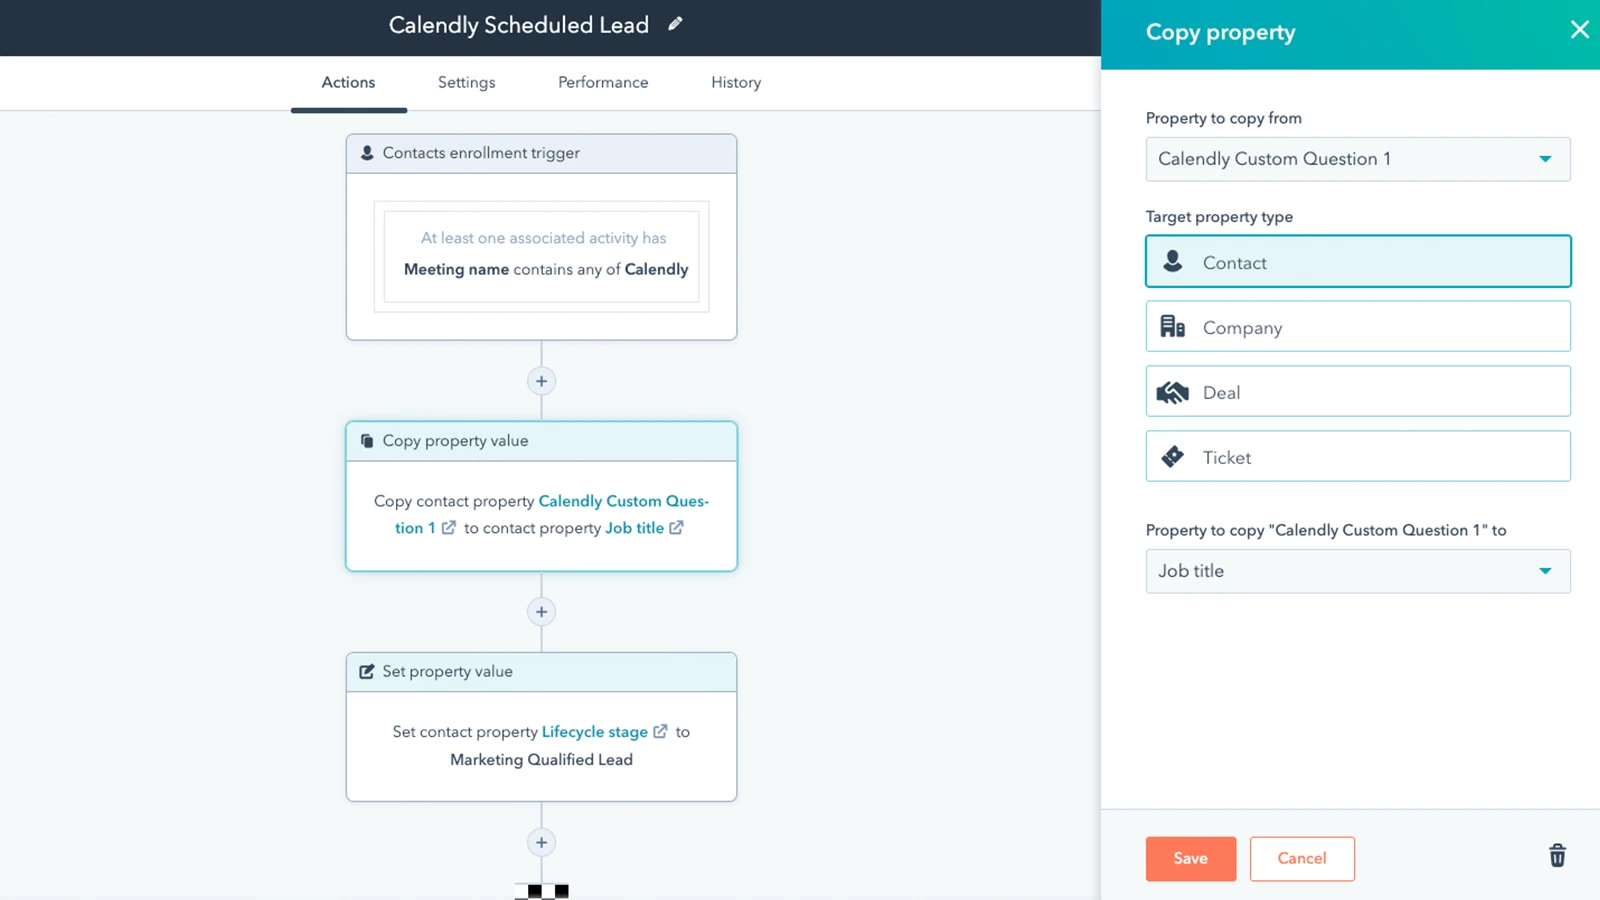 Example of a Calendly Scheduled Lead in Hubspot